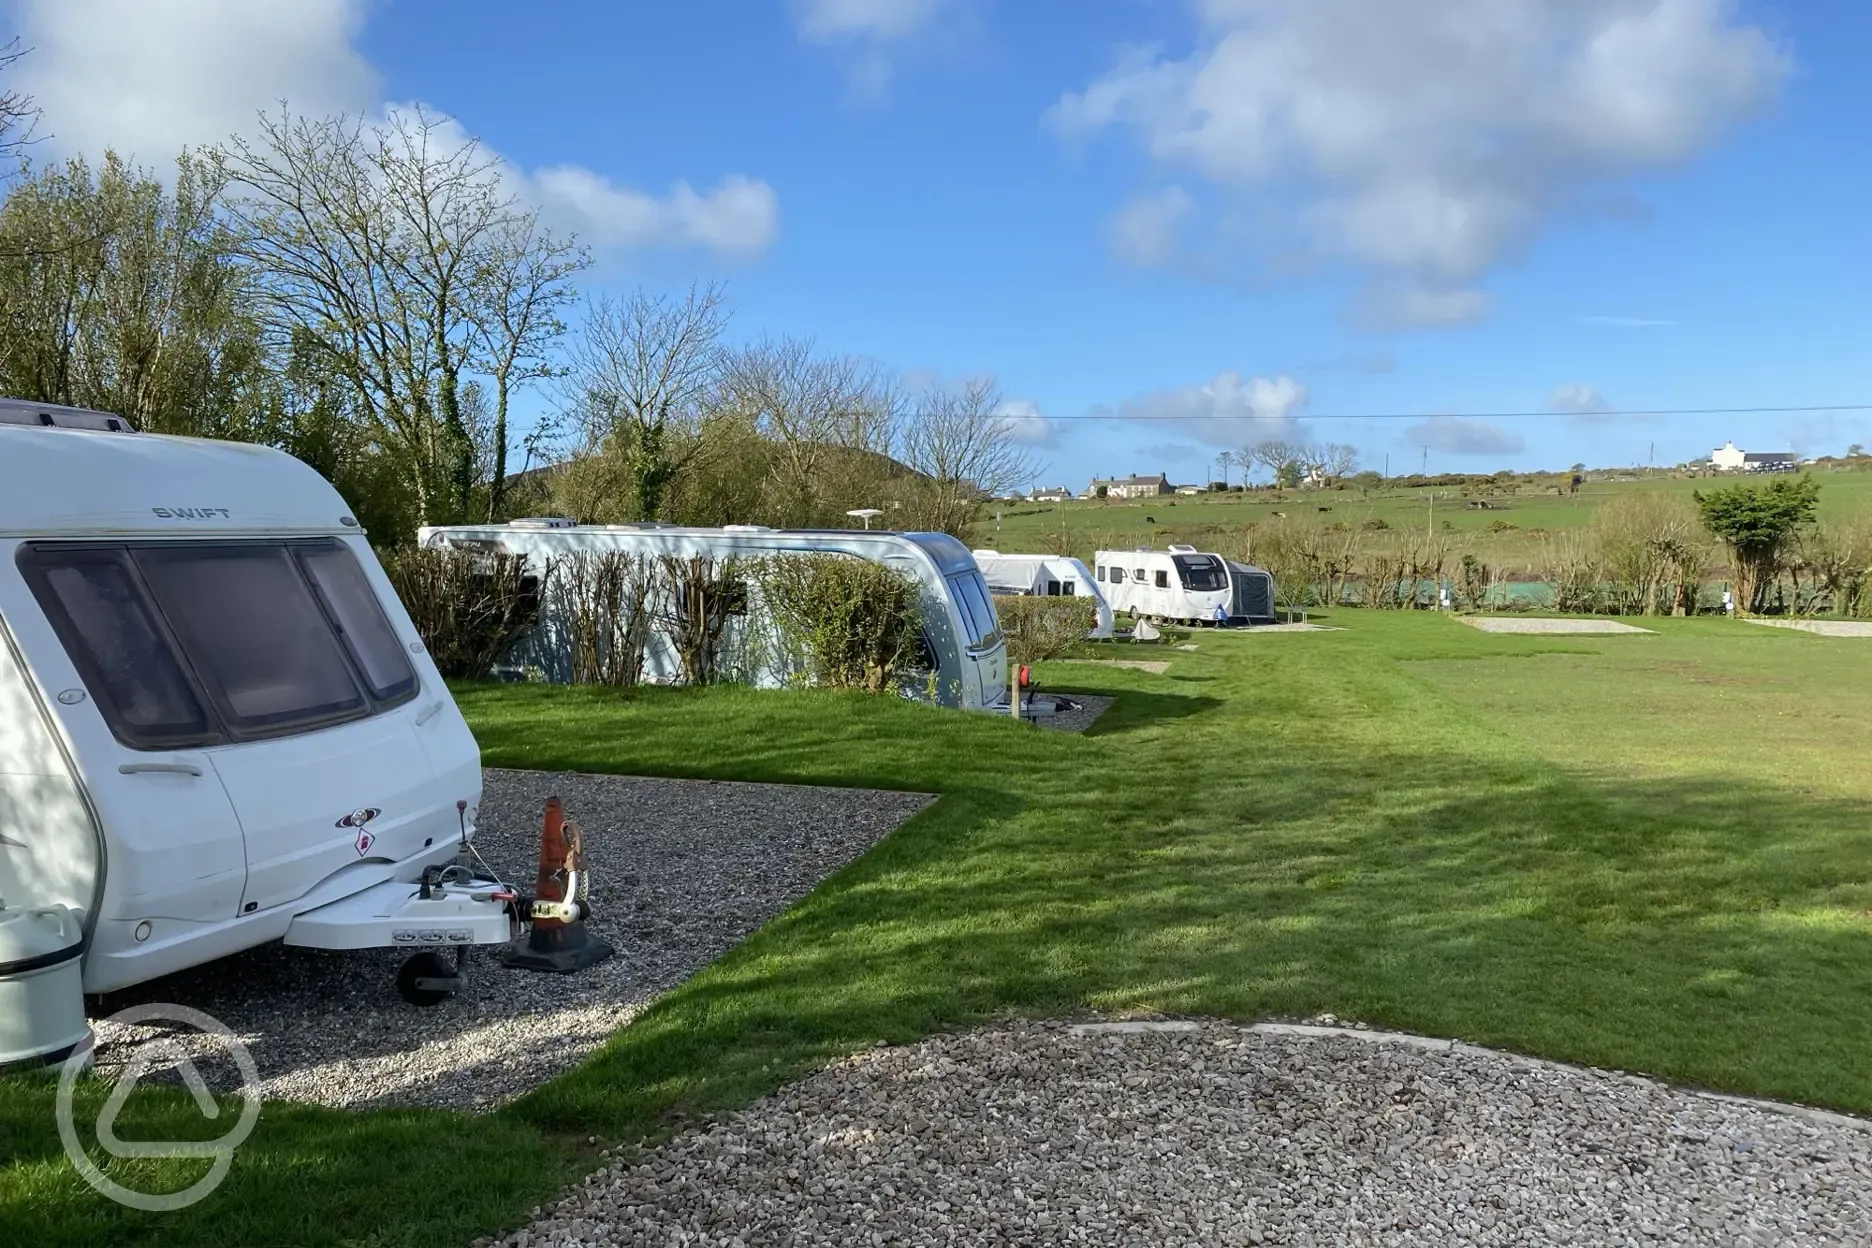 Hardstanding fully serviced pitches